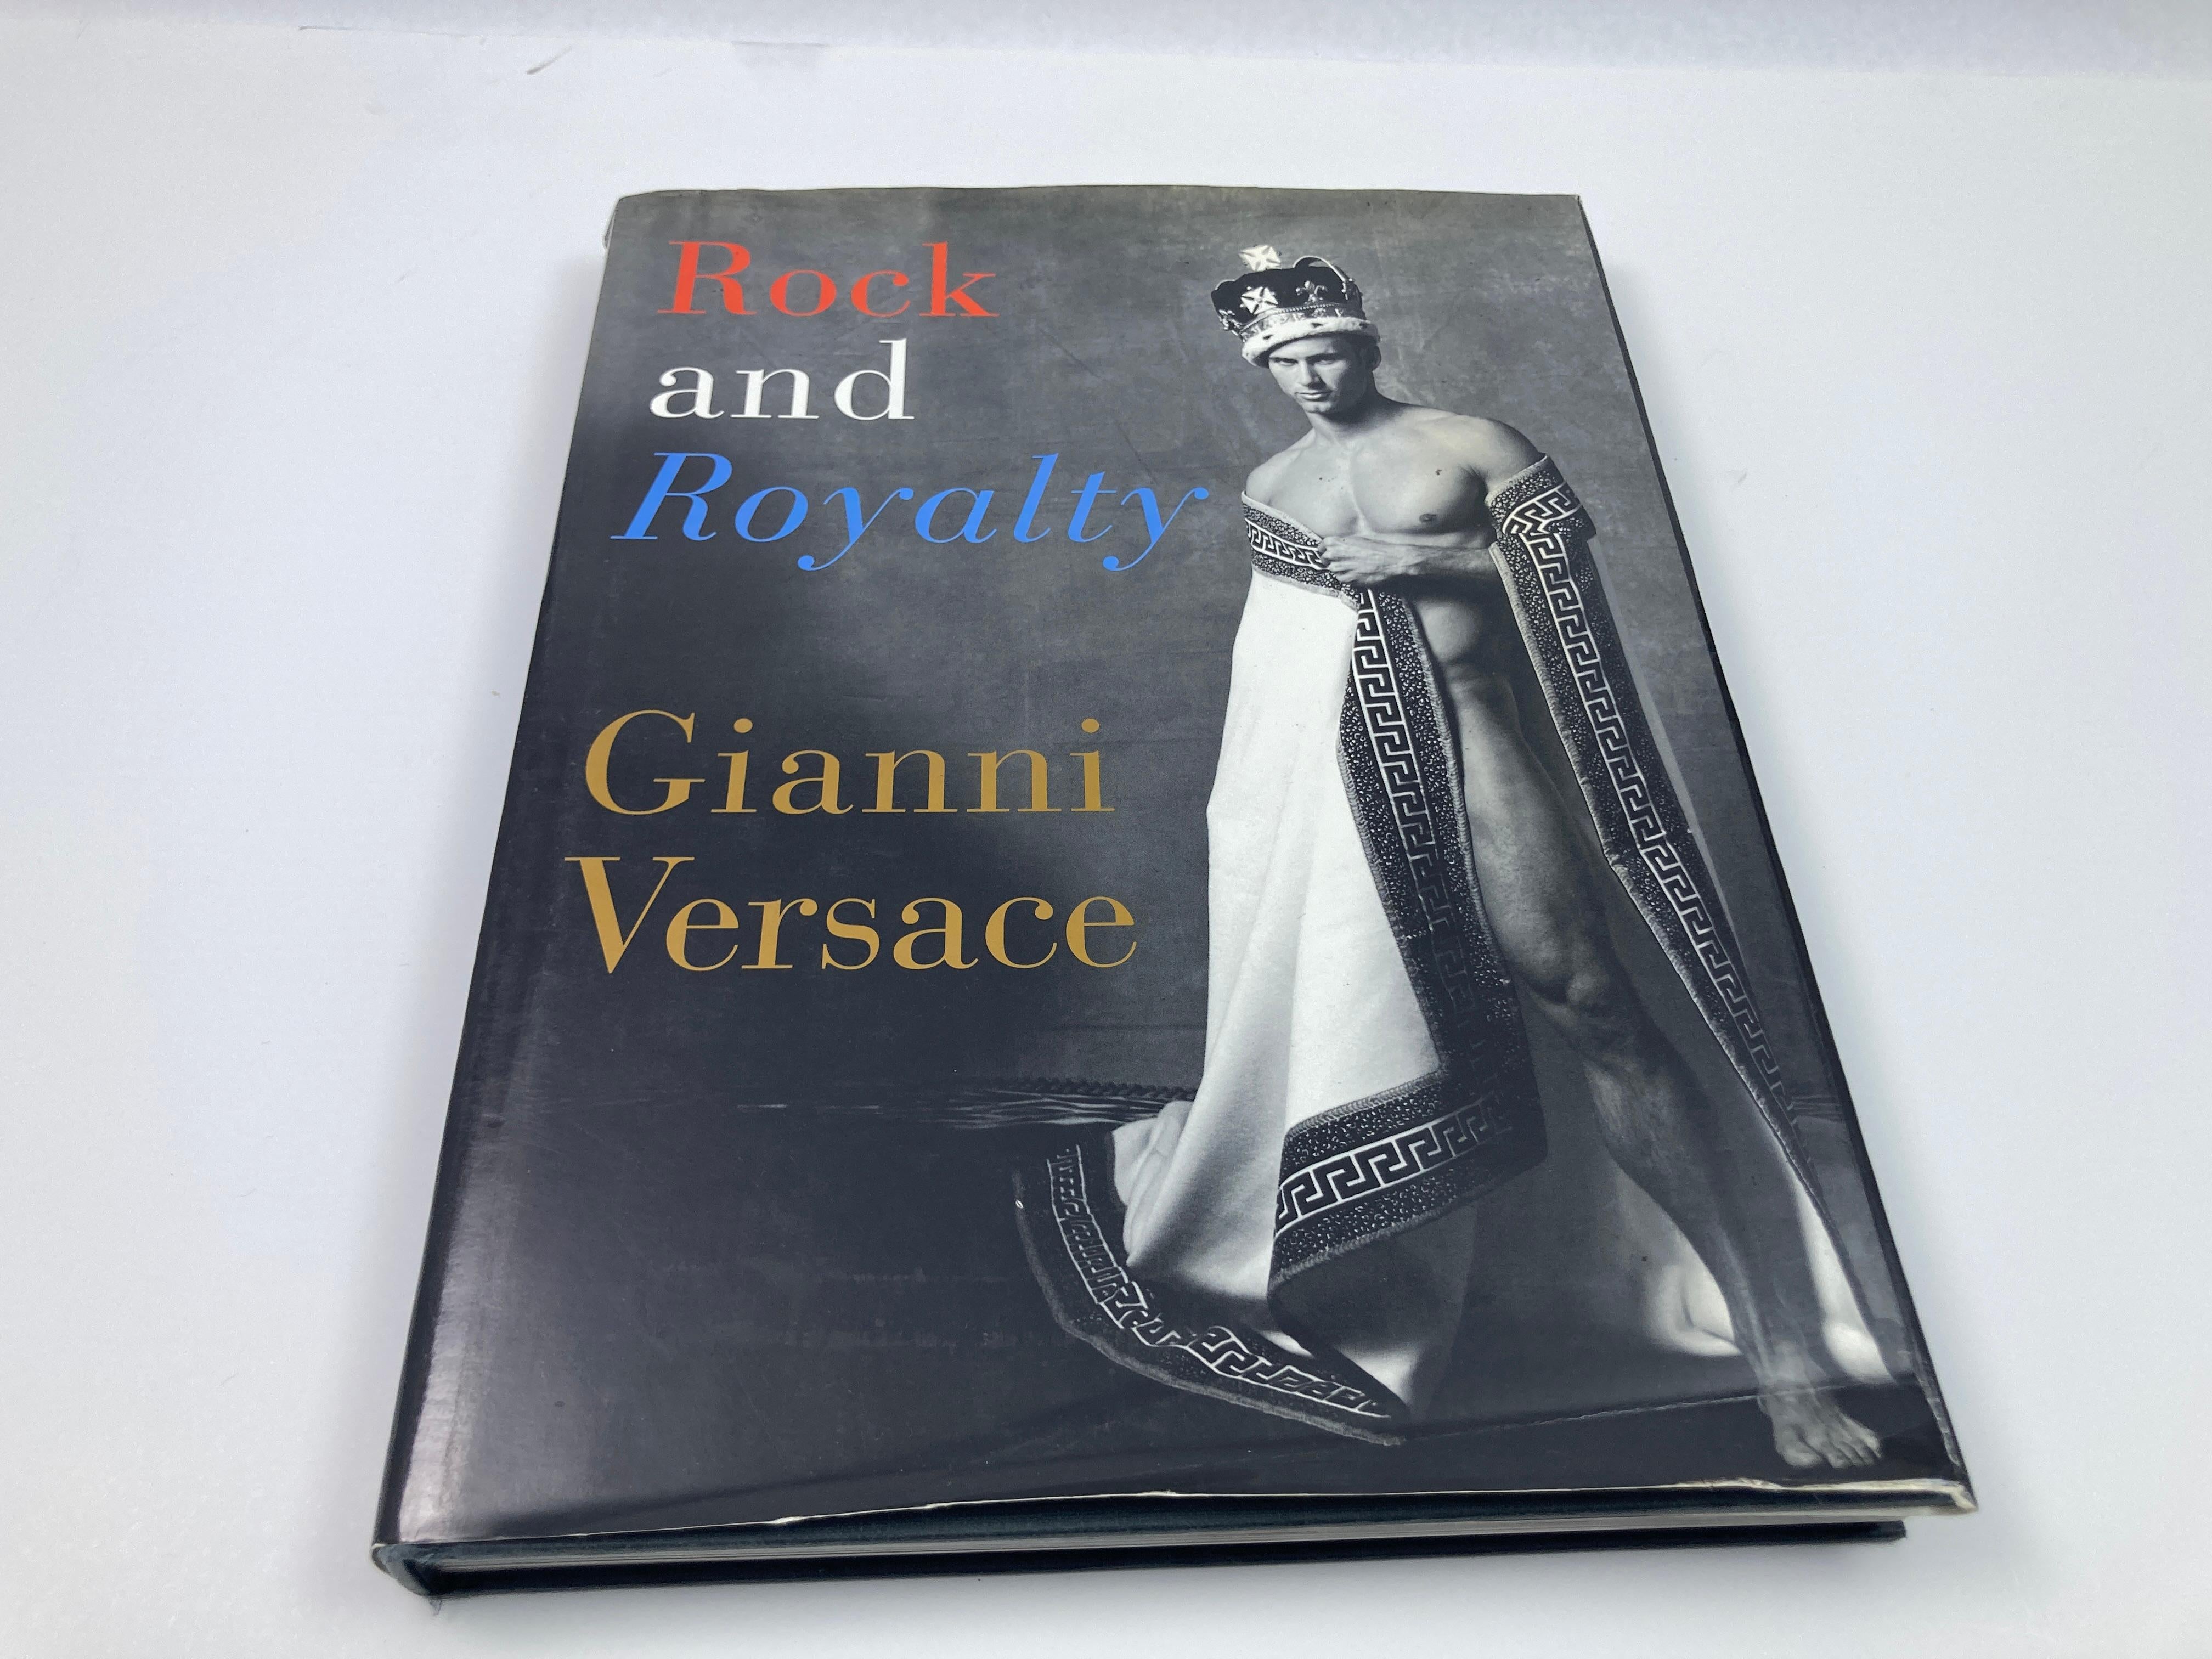 Rock and Royalty Gianni Versace Hardcover Large Coffee Table Book.Abbeville Press, 1999 - Celebrities - 288 pages EnglishFashion's late king here offers a parade of couture featuring the luminaries of rock, royalty, and sport. A galaxy of stars,